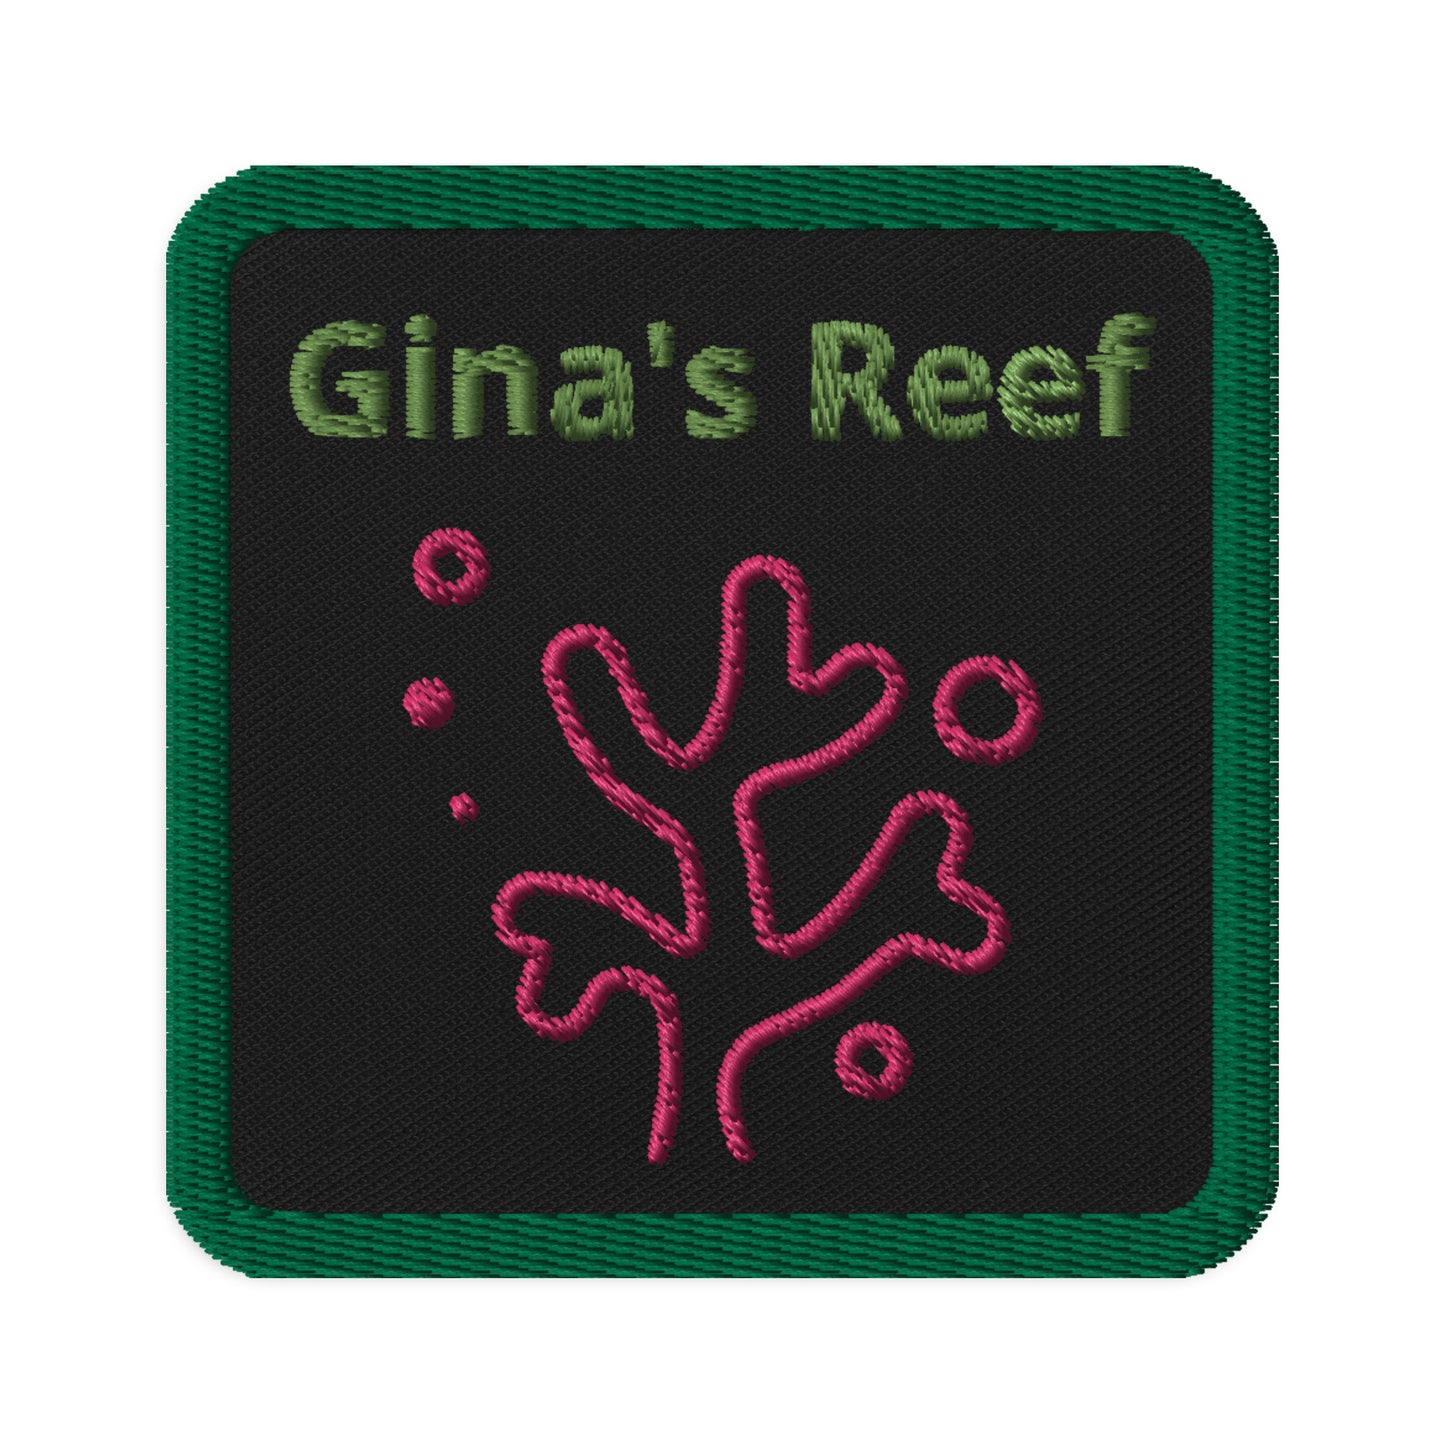 Gina's Reef Embroidered Patch